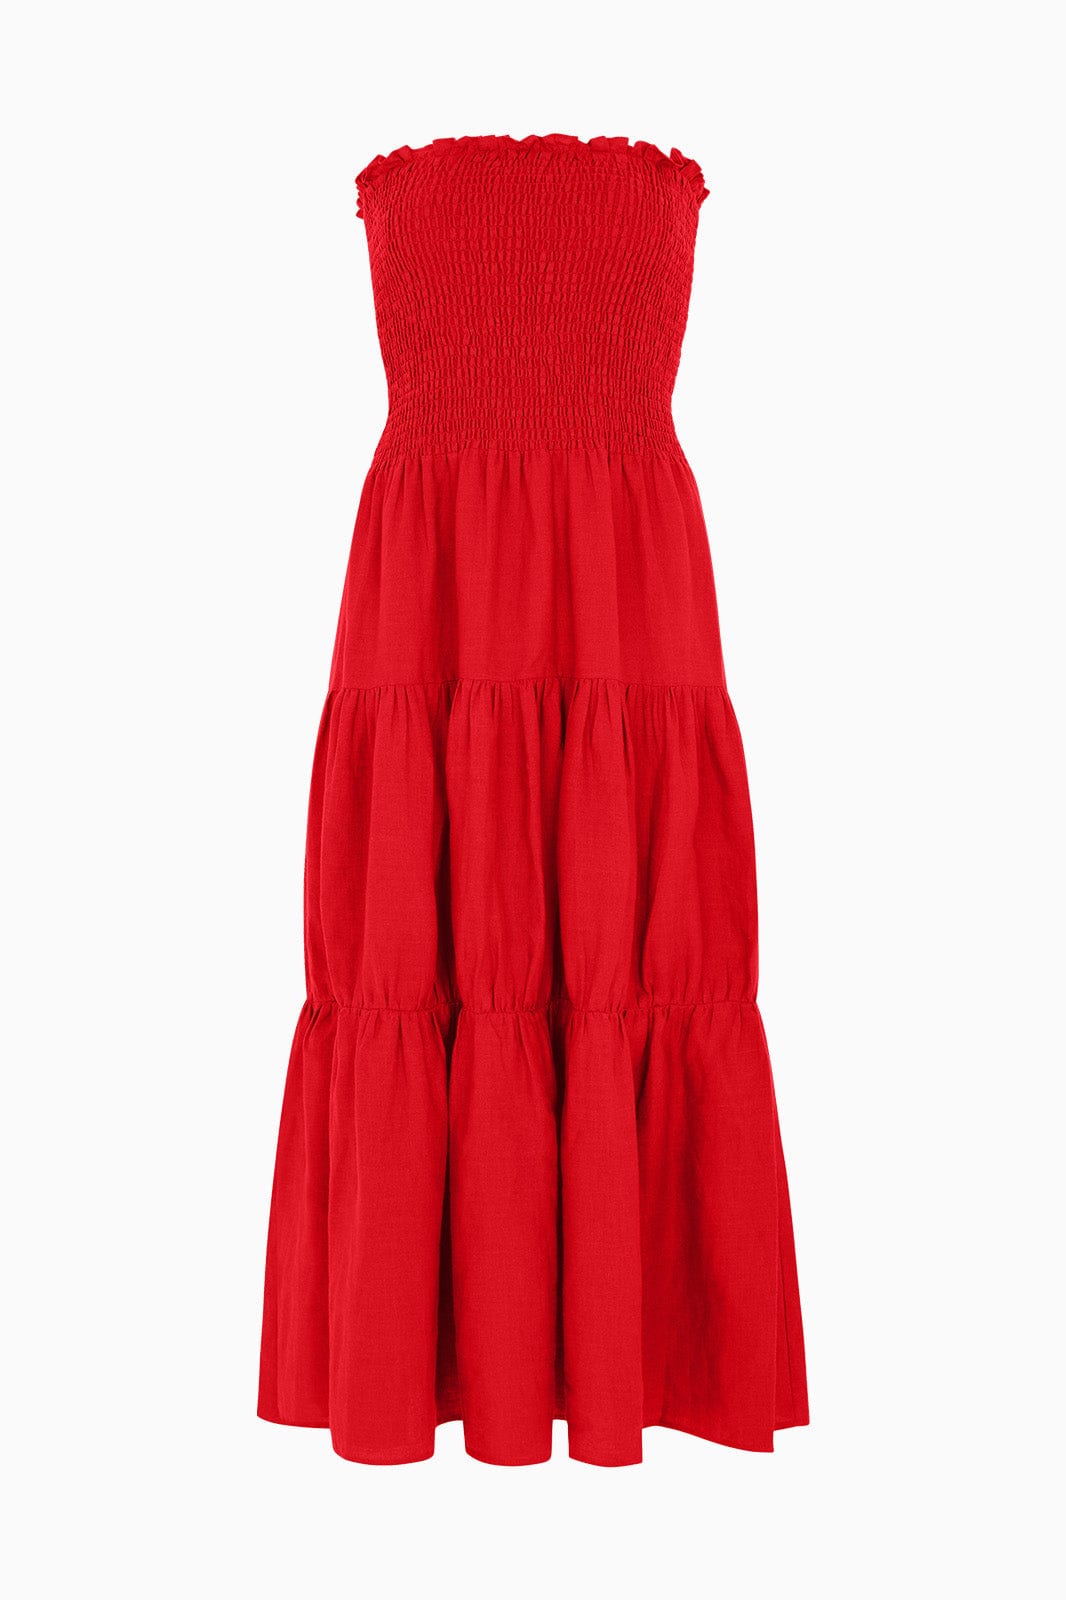 arkitaip Maxi Dresses red The Nini Smocked Bustier Dress in red